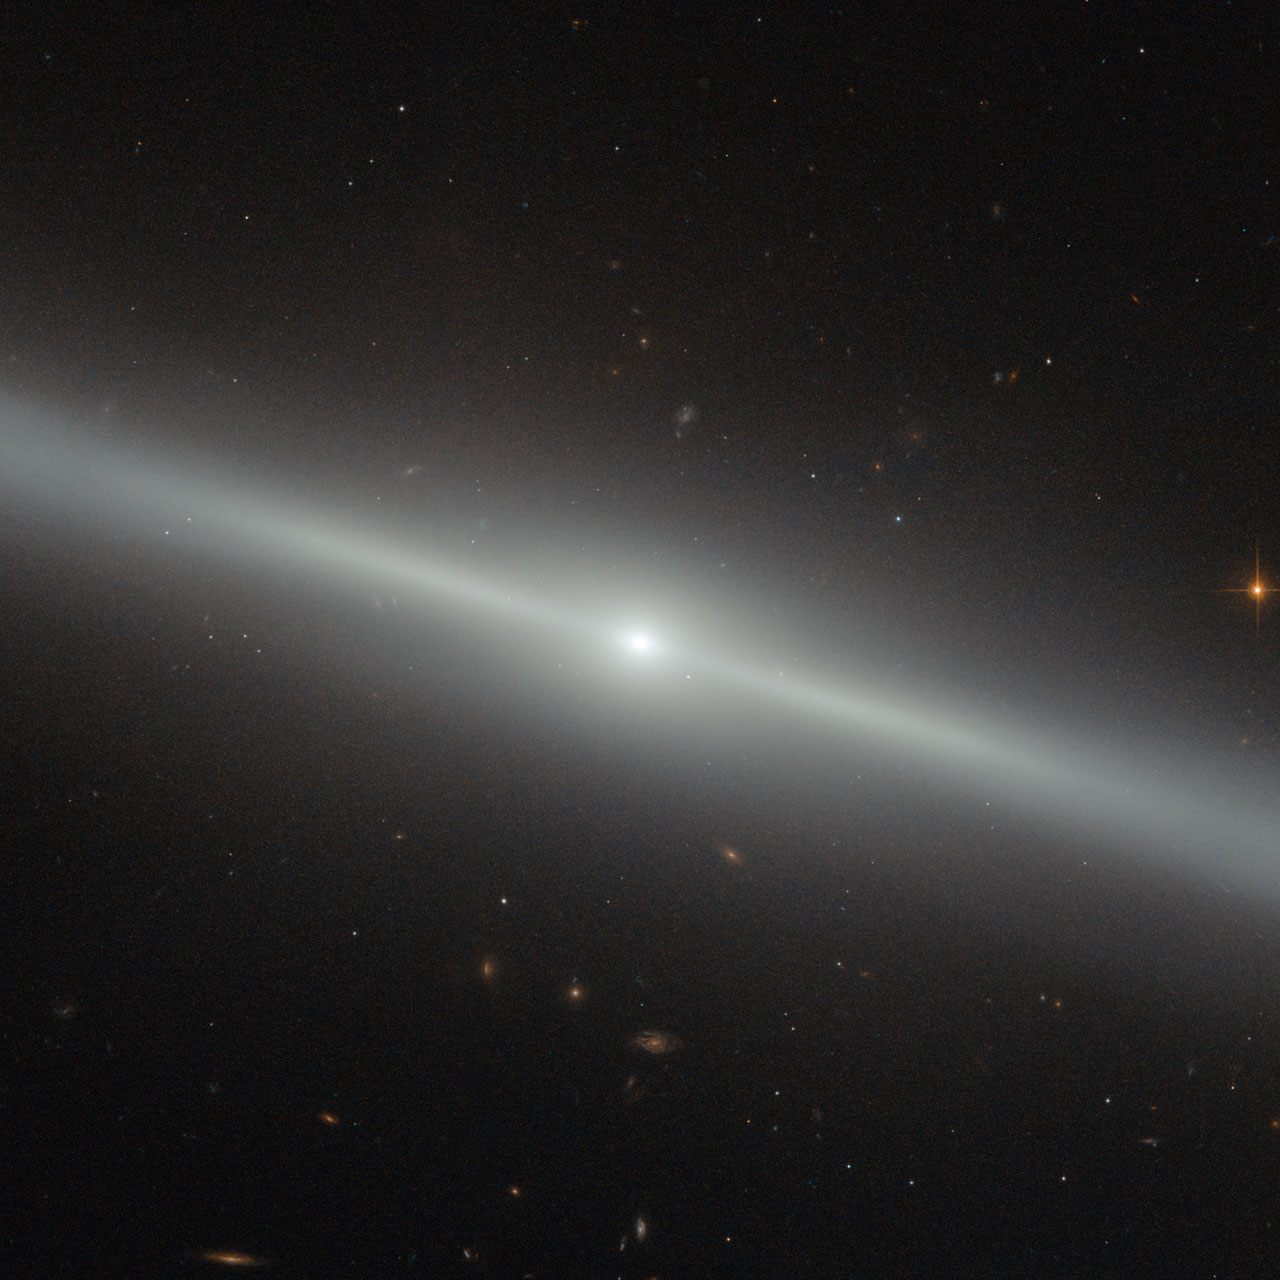 This spectacular image was captured by the NASA/ESA Hubble Space Telescope's Advanced Camera for Surveys (ACS). The bright streak slicing across the frame is an edge-on view of galaxy NGC 4762, and a number of other distant galaxies can be seen scattered in the background. NGC 4762 lies about 58 million light-years away in the constellation of Virgo (The Virgin). It is part of the Virgo Cluster, hence its alternative designation of  VCC 2095 for Virgo Cluster Catalogue entry. This catalogue is a listing of just over 2000 galaxies in the area of the Virgo Cluster. The Virgo Cluster is actually prominently situated, and lies at the centre of the larger Virgo supercluster, of which our galaxy group, the Local Group, is a member. Previously thought to be a barred spiral galaxy, NGC 4762 has since been found to be a lenticular galaxy, a kind of intermediate step between an elliptical and a spiral. The edge-on view that we have of this particular galaxy makes it difficult to determine its true shape, but astronomers have found the galaxy to consist of four main components — a central bulge, a bar, a thick disc and an outer ring. The galaxy's disc is asymmetric and warped, which could potentially be explained by NGC 4762 violently cannibalising a smaller galaxy in the past. The remains of this former companion may then have settled within NGC 4762's disc, redistributing the gas and stars and so changing the disc's morphology. NGC 4762 also contains a Liner-type Active Galactic Nucleus, a highly energetic central region. This nucleus is detectable due to its particular spectral line emission, which acts as a type of "atomic fingerprint", allowing astronomers to measure the composition of the region.